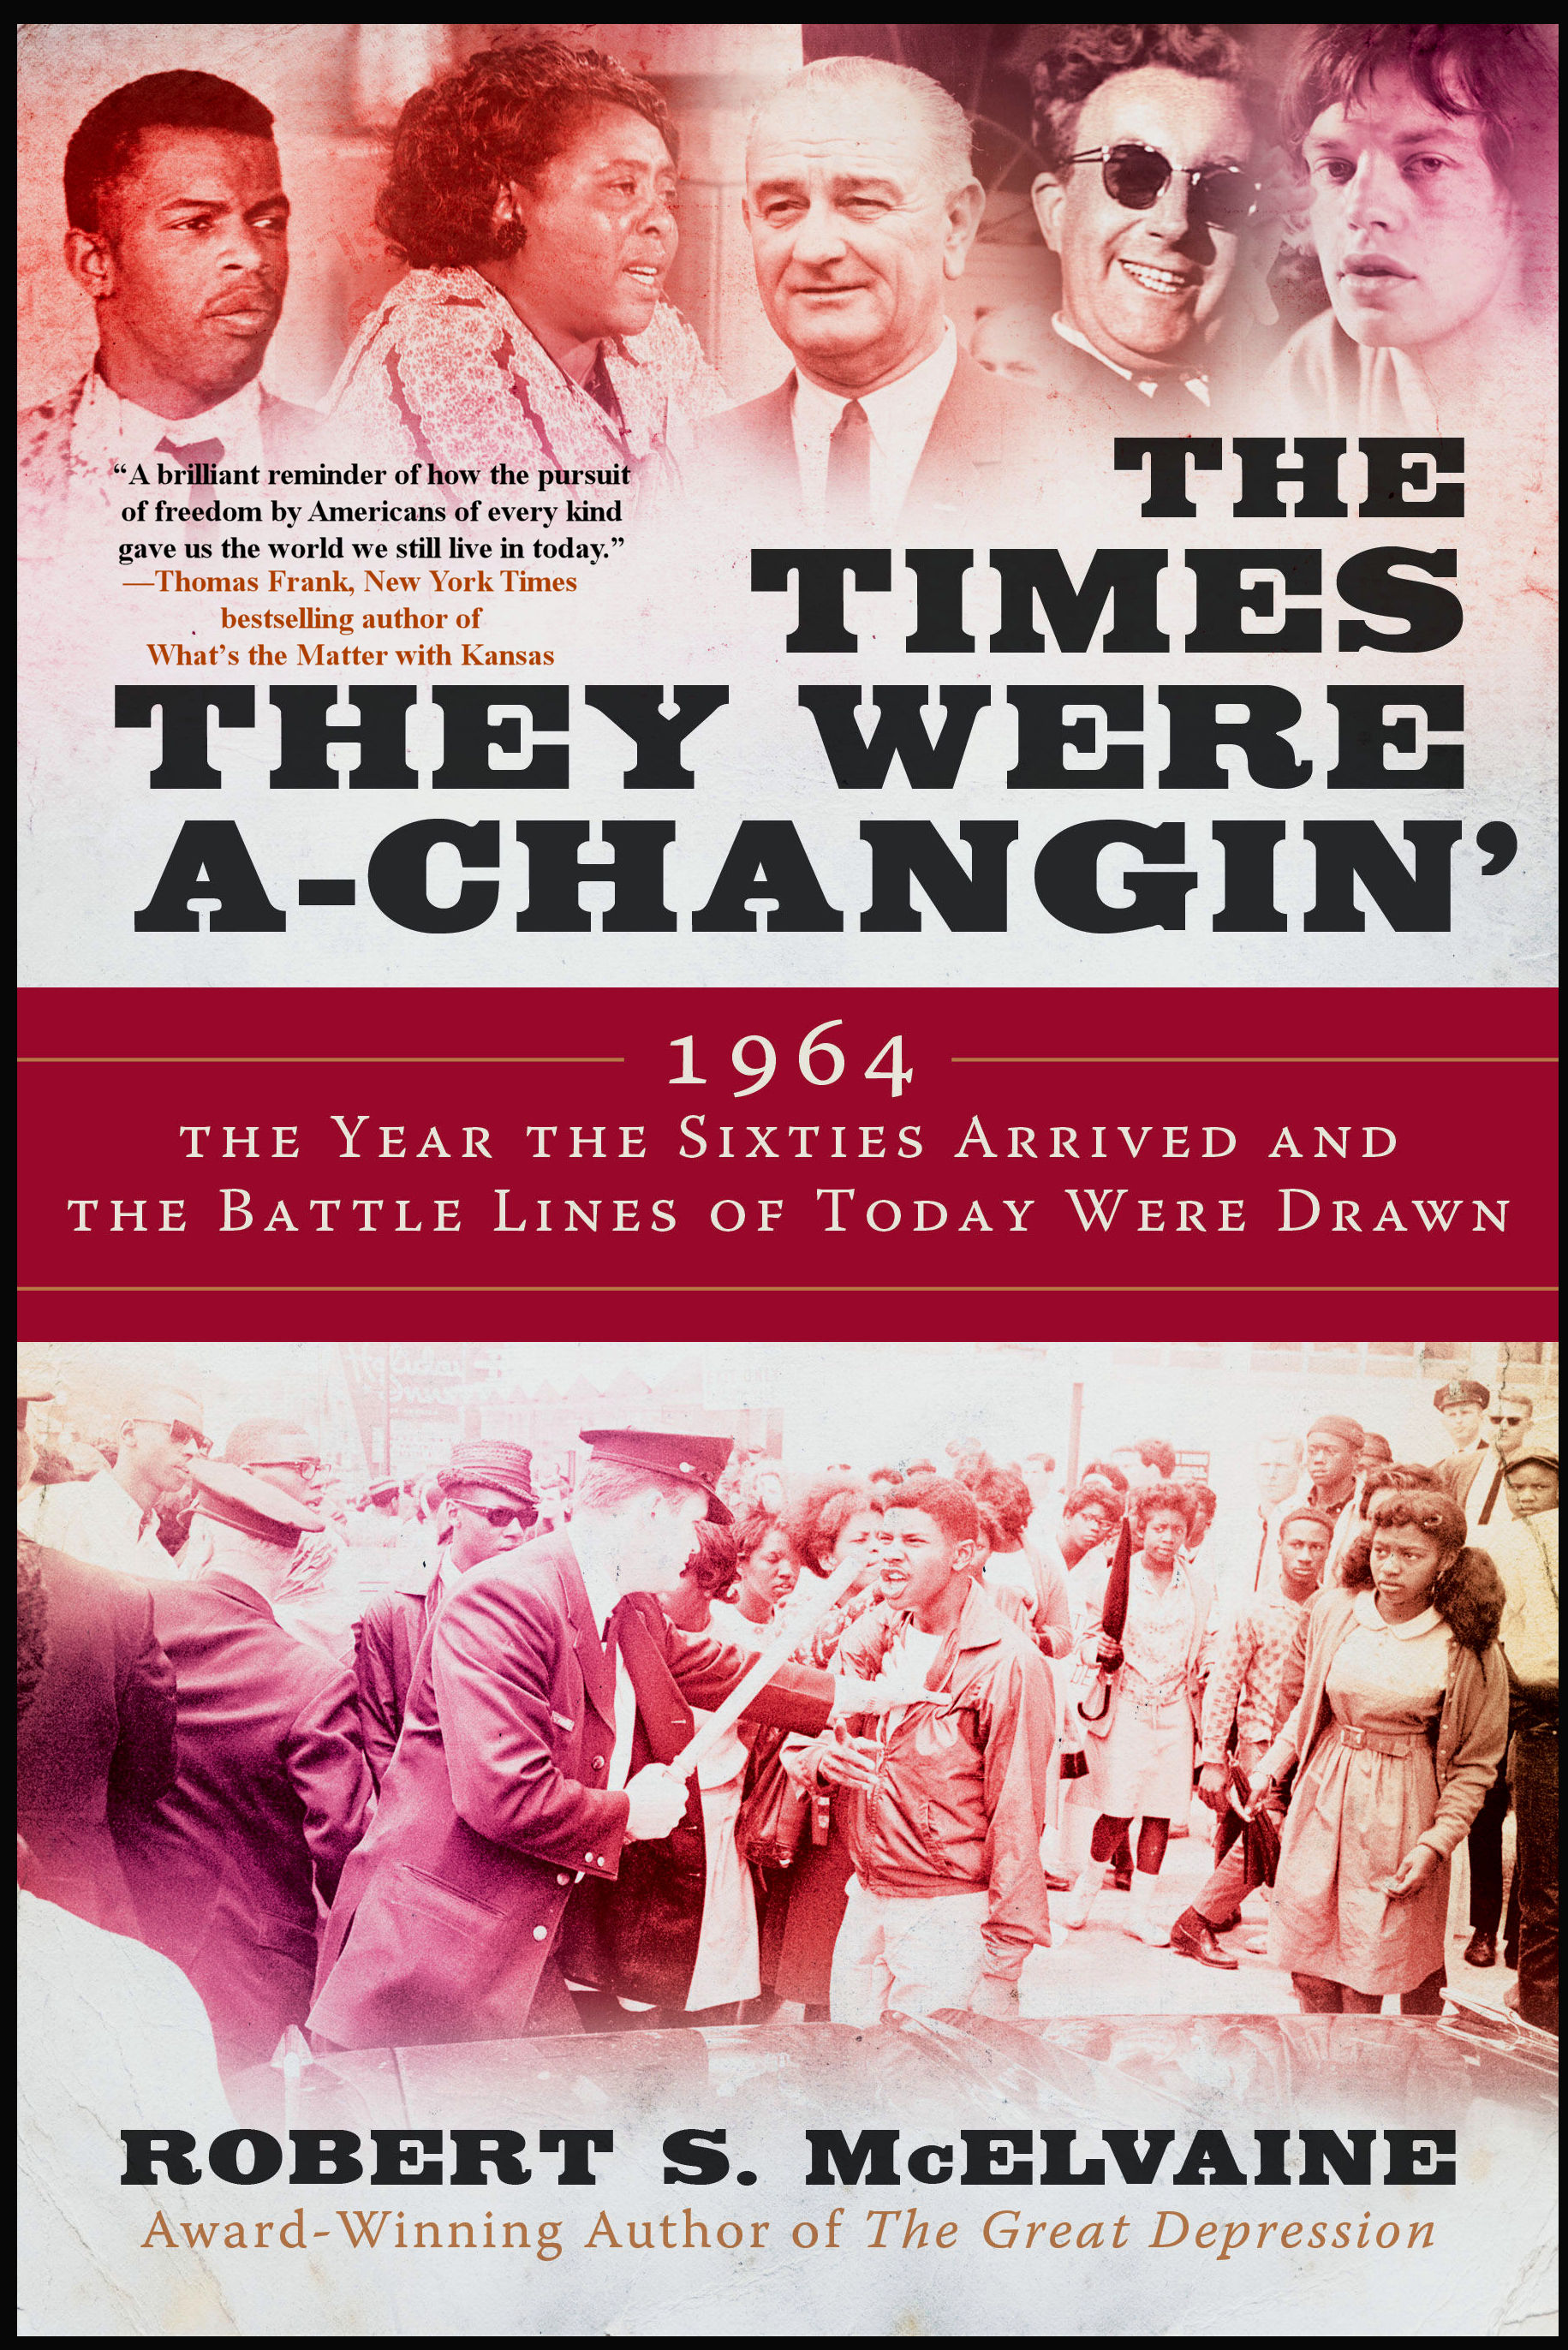 The Times They Were a-Changin' - 1964: The Year the "Sixties" Arrived and the Battle Lines of Today Were Drawn